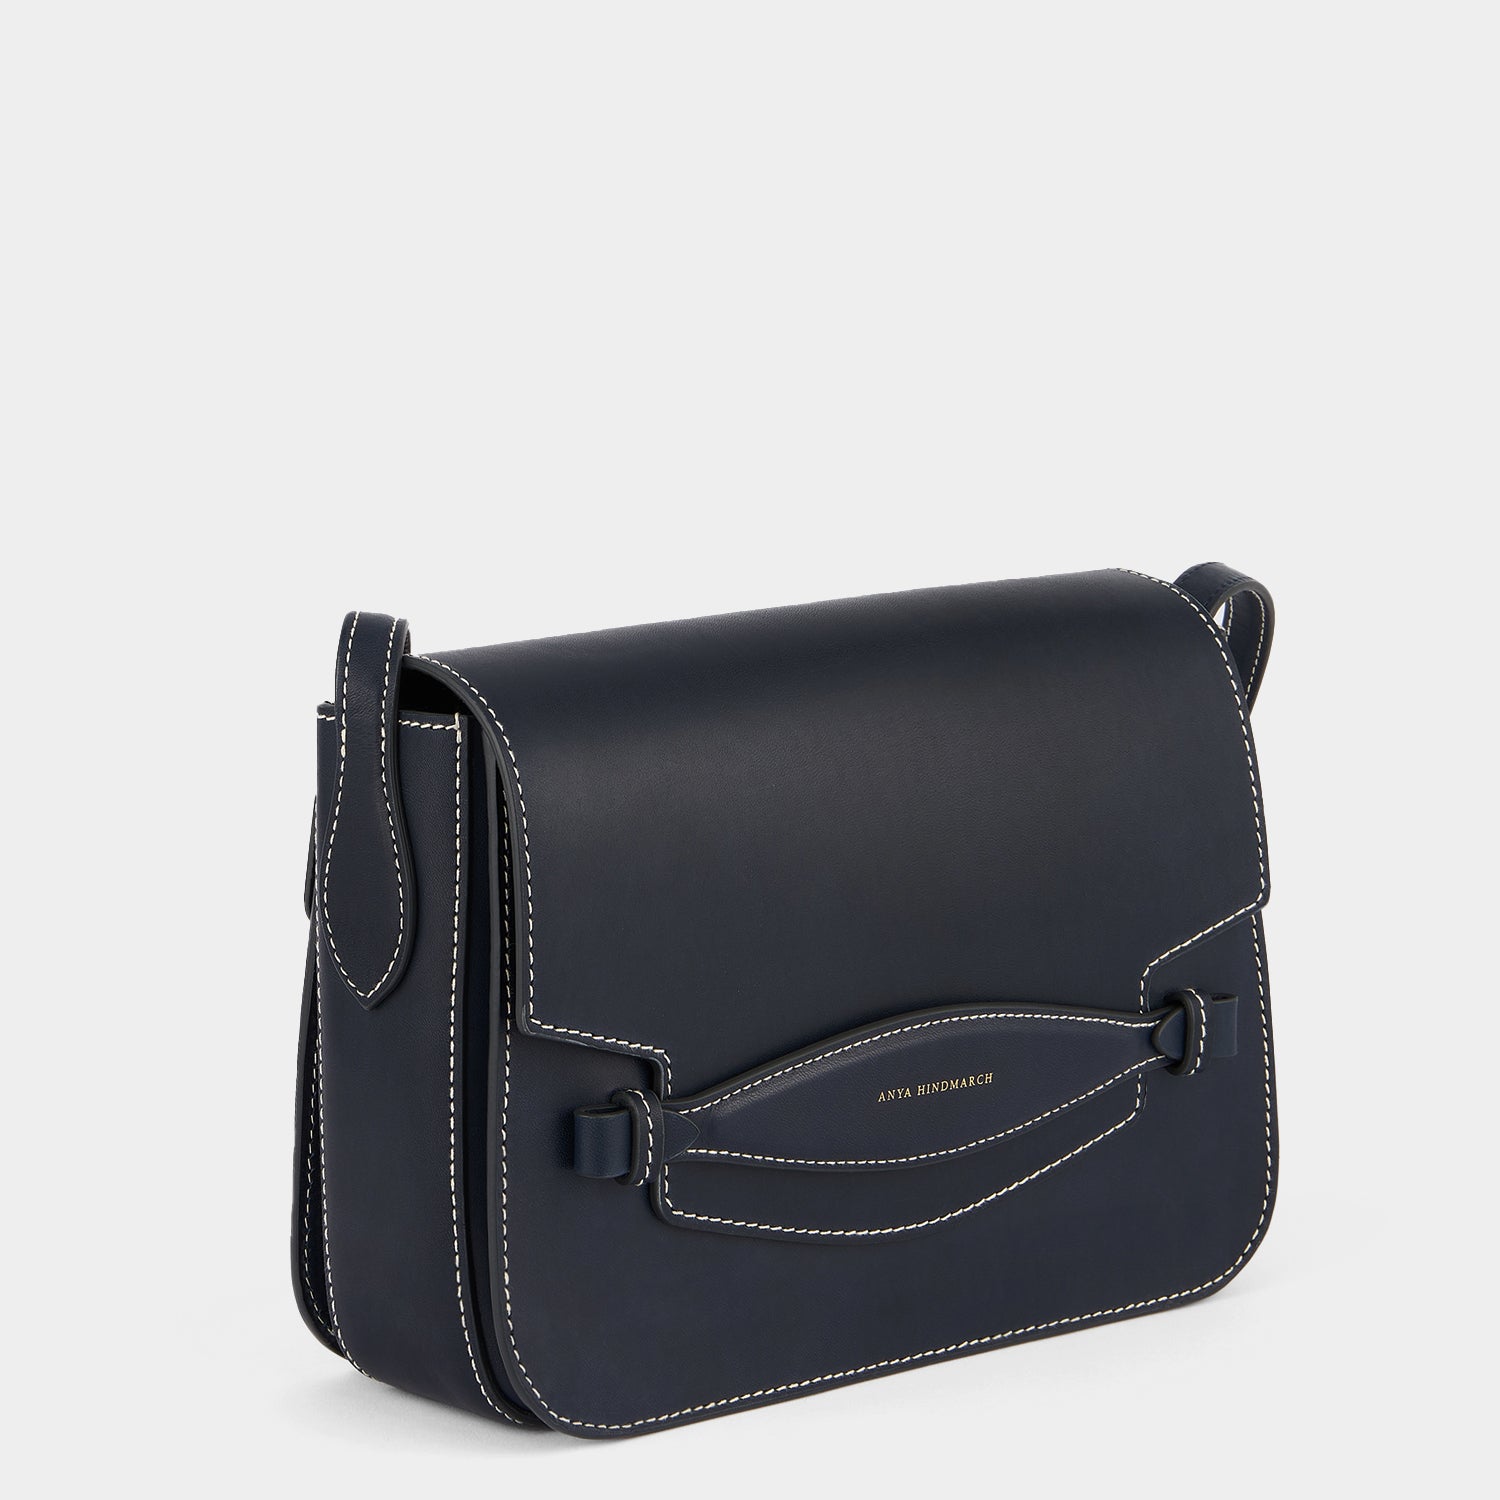 「Return to Nature」ショルダーバッグ -

                  
                    Compostable Leather in Marine -
                  

                  Anya Hindmarch JP
